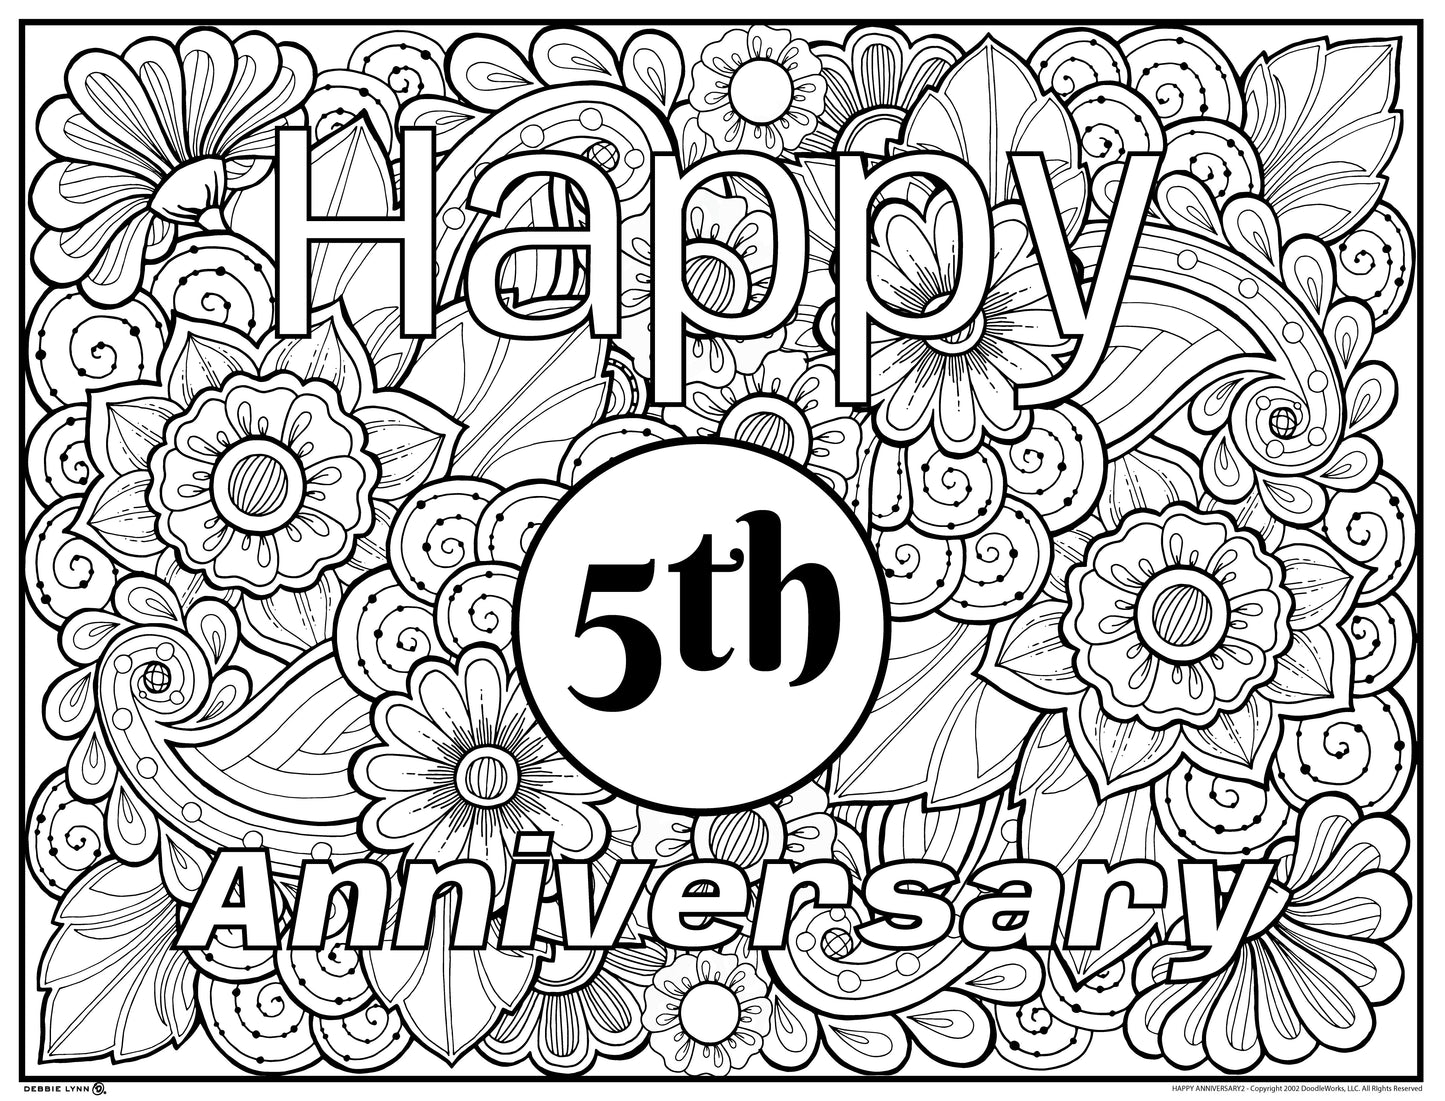 Anniversary Flowers Personalized Giant Coloring Poster 46"x60"